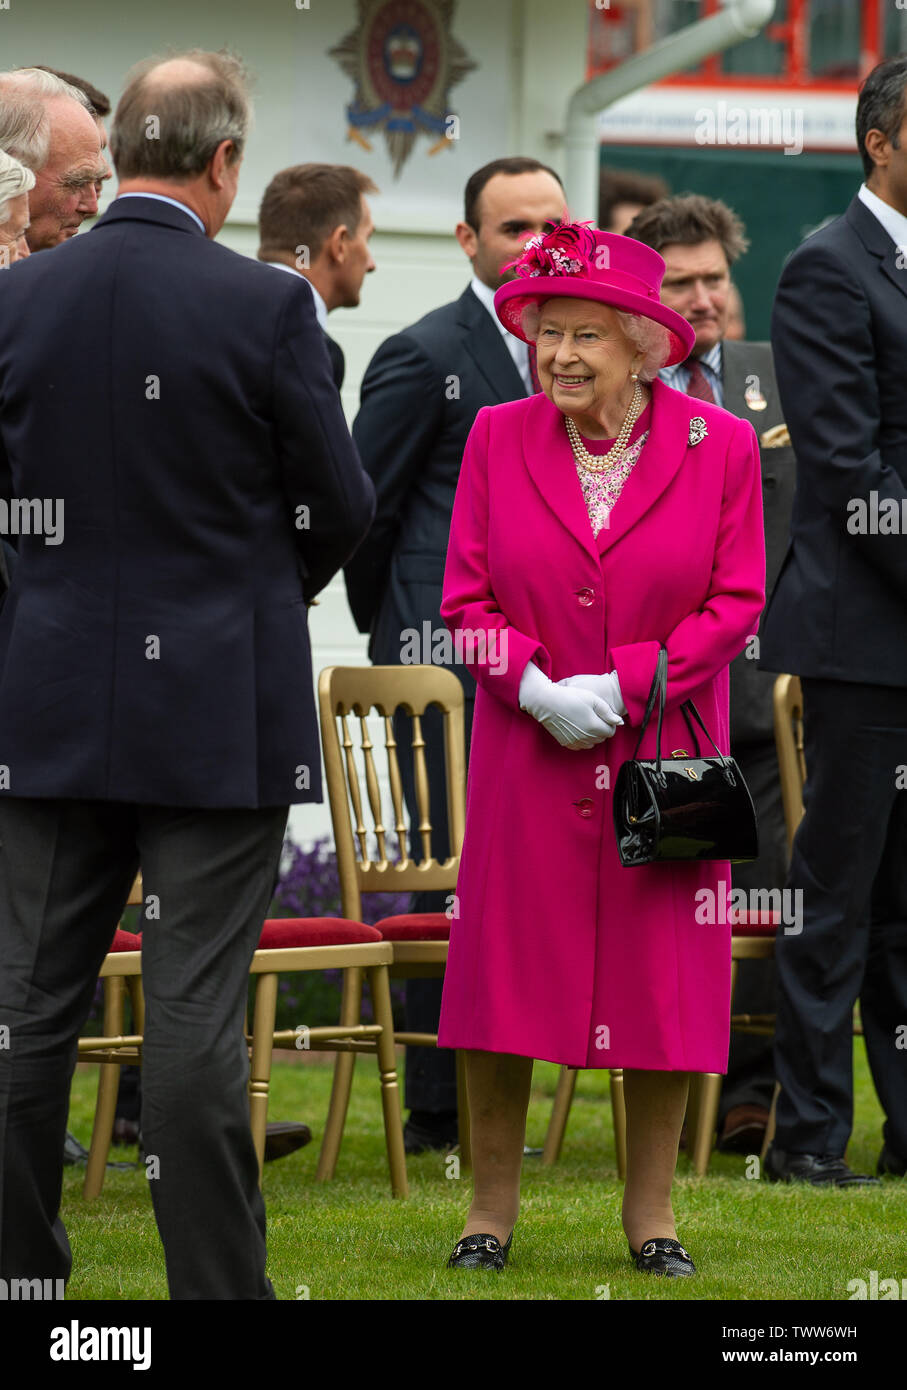 Windsor Great Park, Egham, Surrey, UK. 23rd June 2019. Her Majesty the Queen looks radiant in a bright pink shift coat and hat as she chats to the Directors of  Guards Polo Club. Credit: Maureen McLean/Alamy Live News Stock Photo